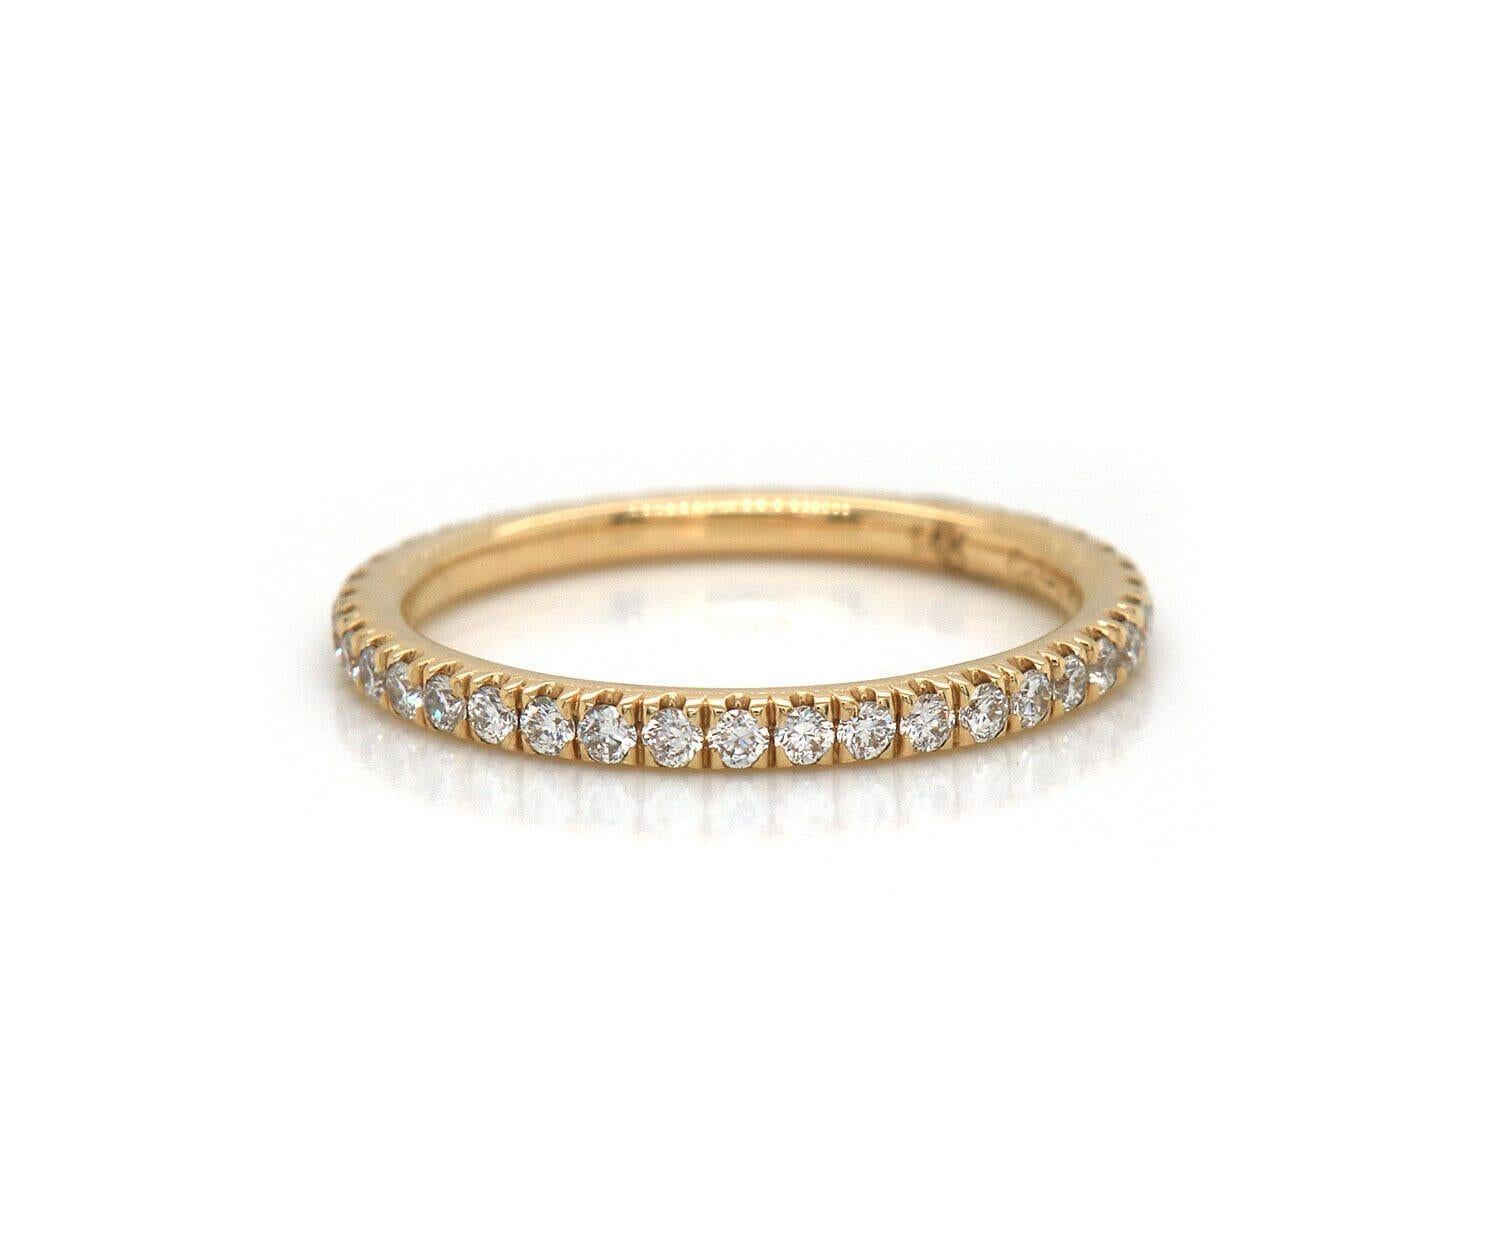 New Gabriel & Co. 0.48ctw Diamond Eternity Band Ring in 14K Yellow Gold In New Condition For Sale In Vienna, VA